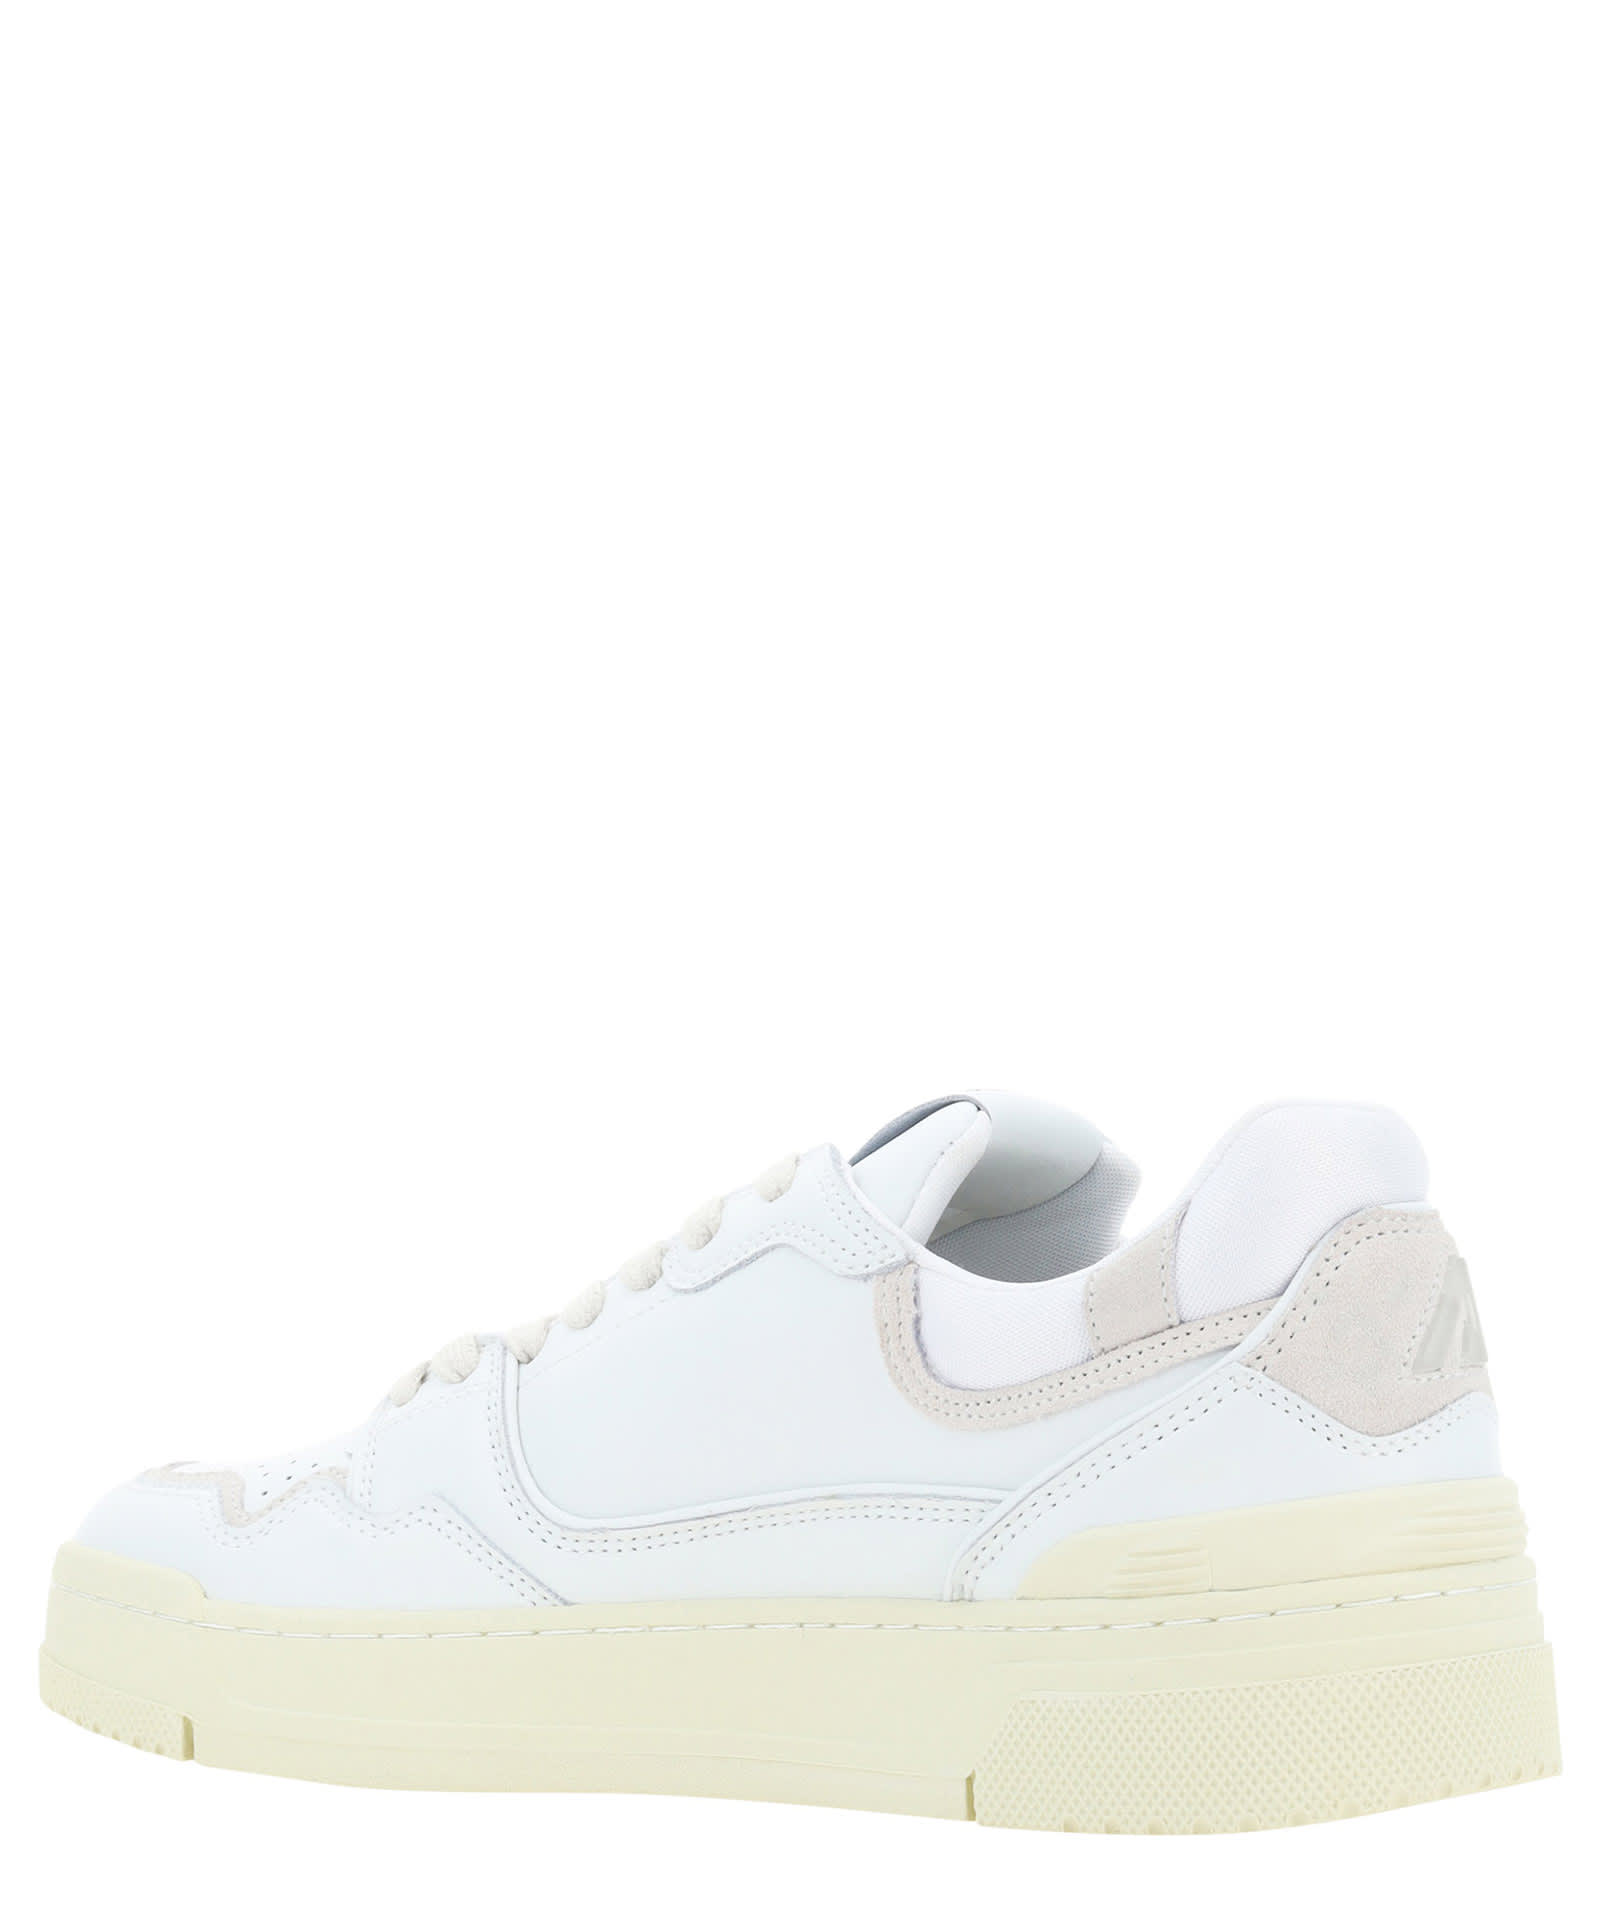 Shop Autry Clc Low Leather Sneakers In White